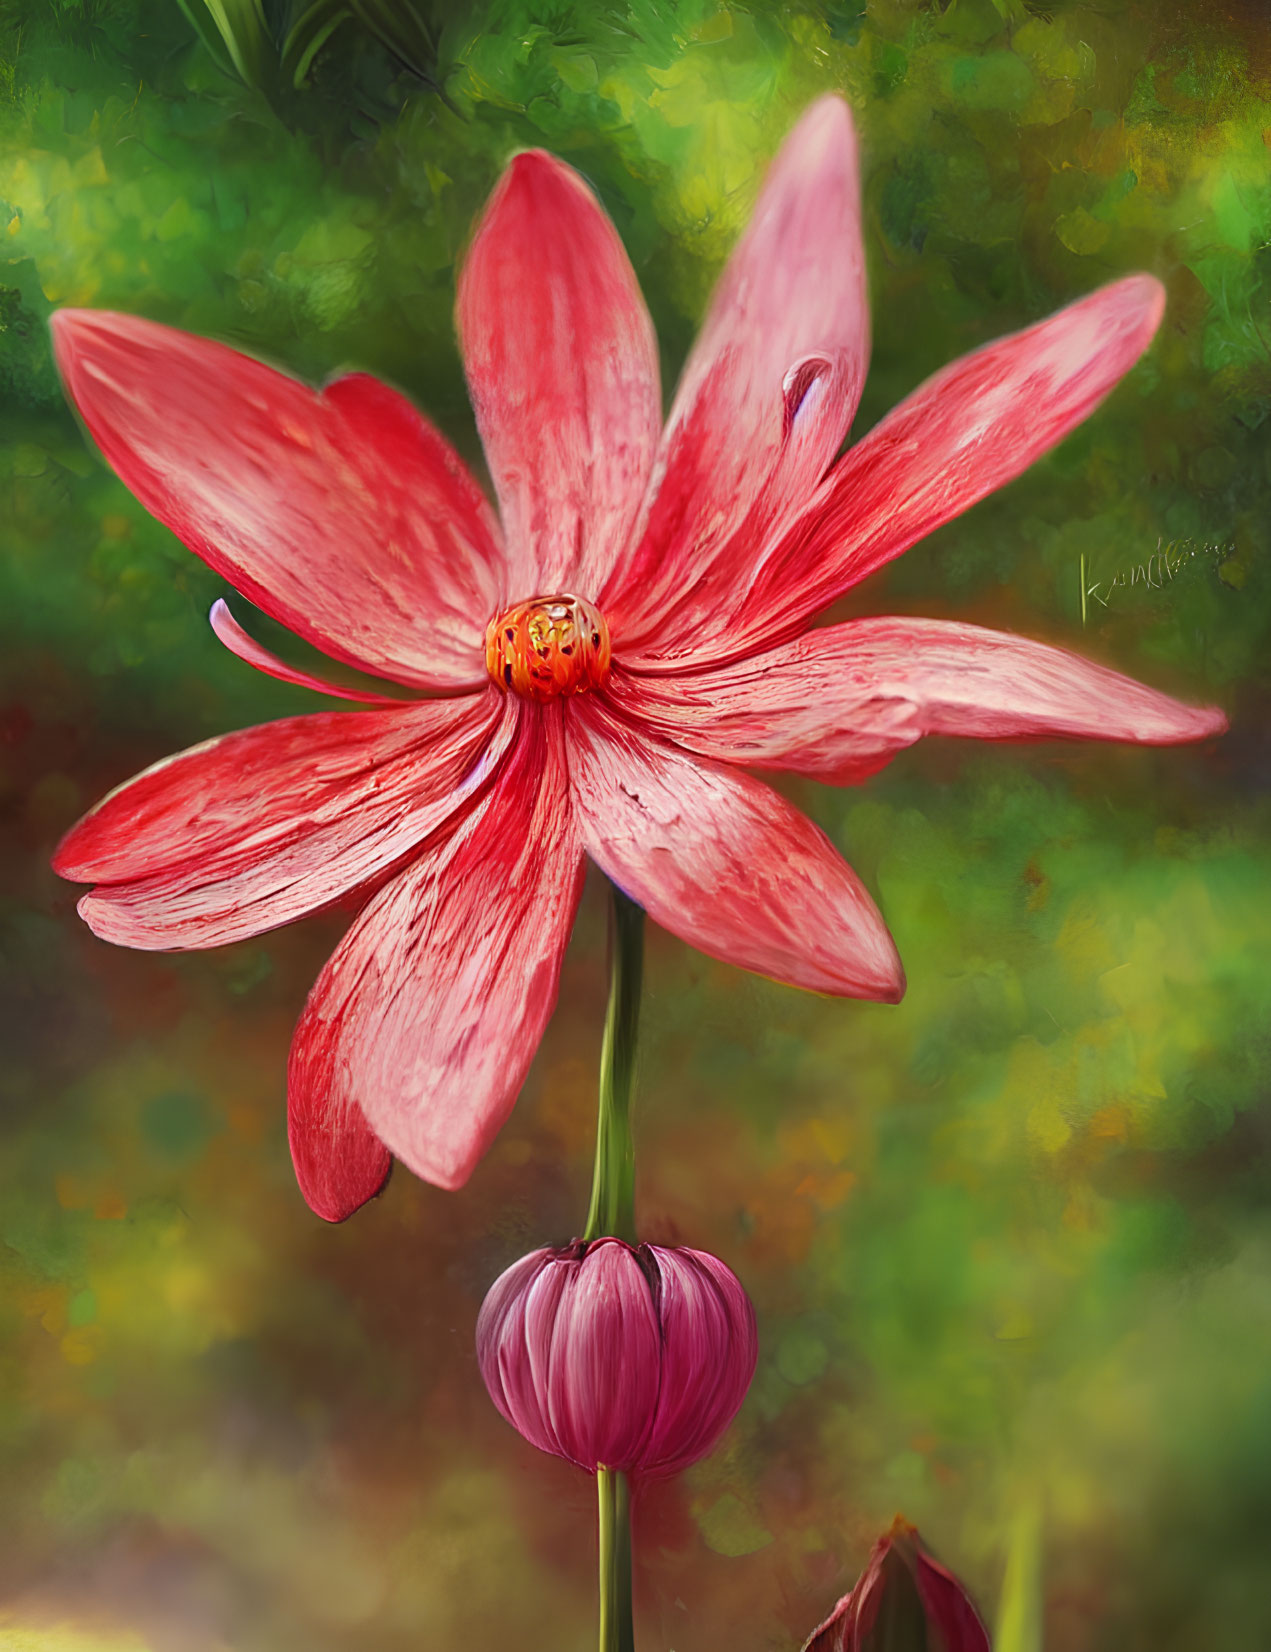 Detailed Pink Lily Flower Against Soft Green Background